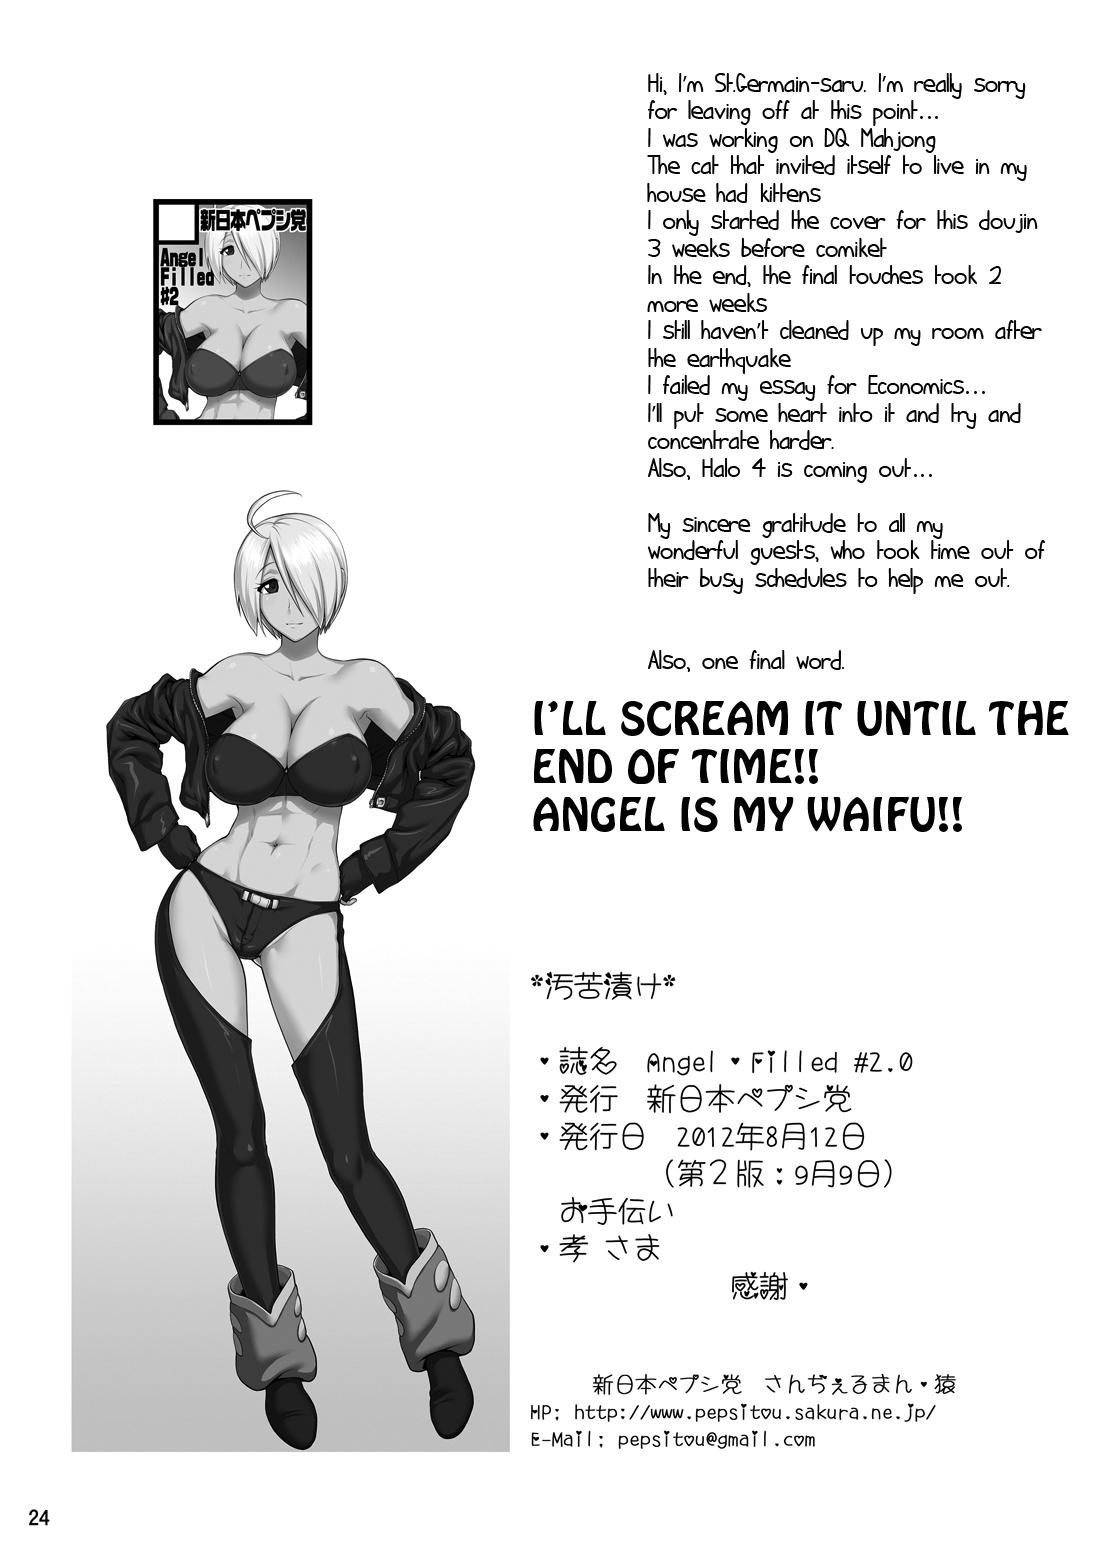 Desi Angel Filled #2.0 - King of fighters Web Cam - Page 25